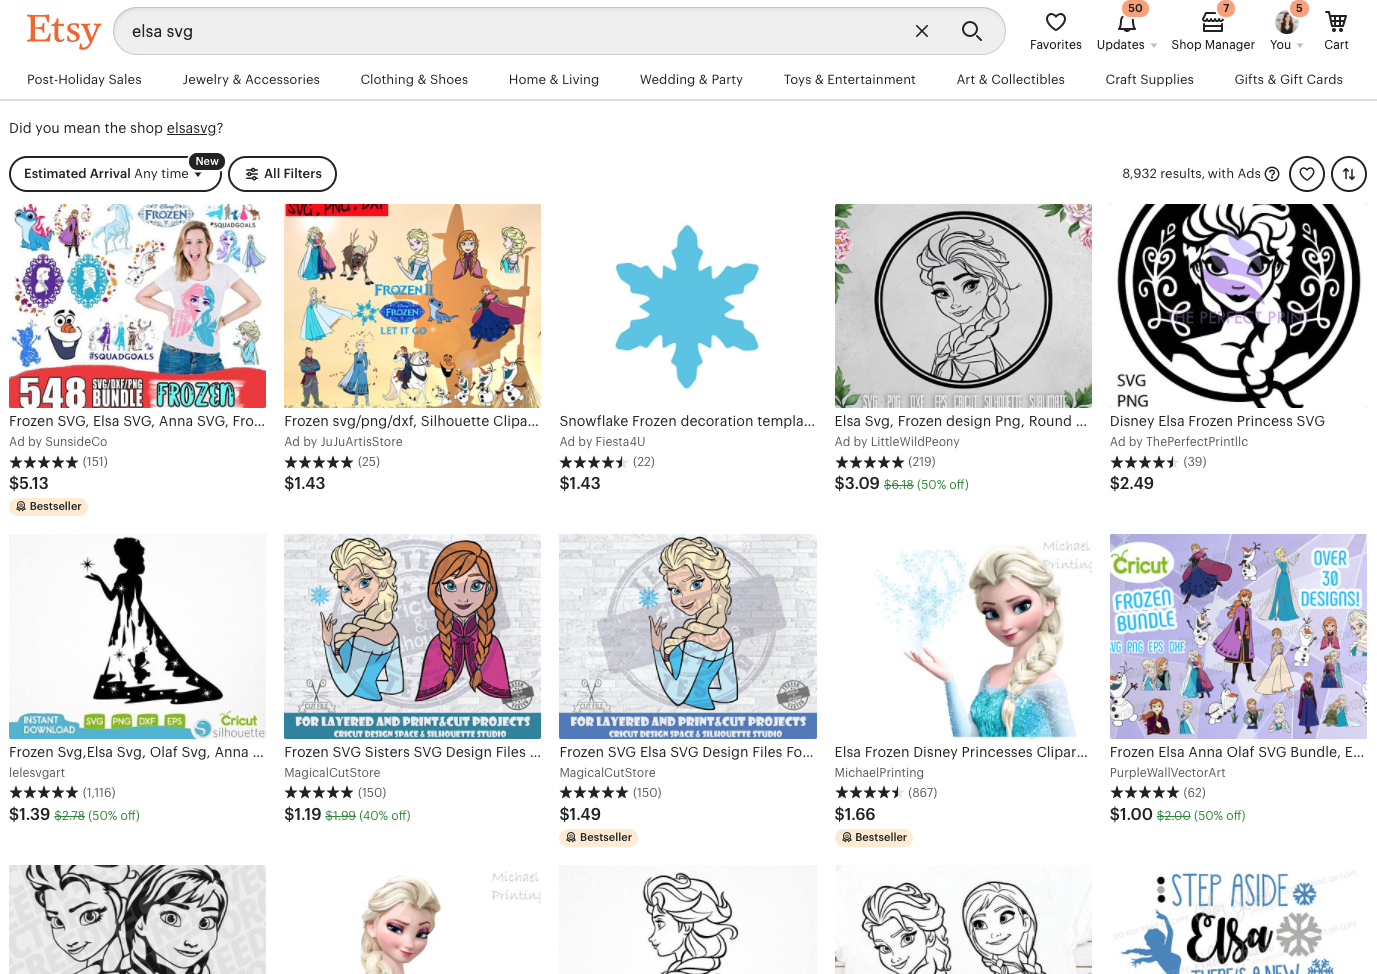 Screenshot of Etsy with Elsa (Frozen) images